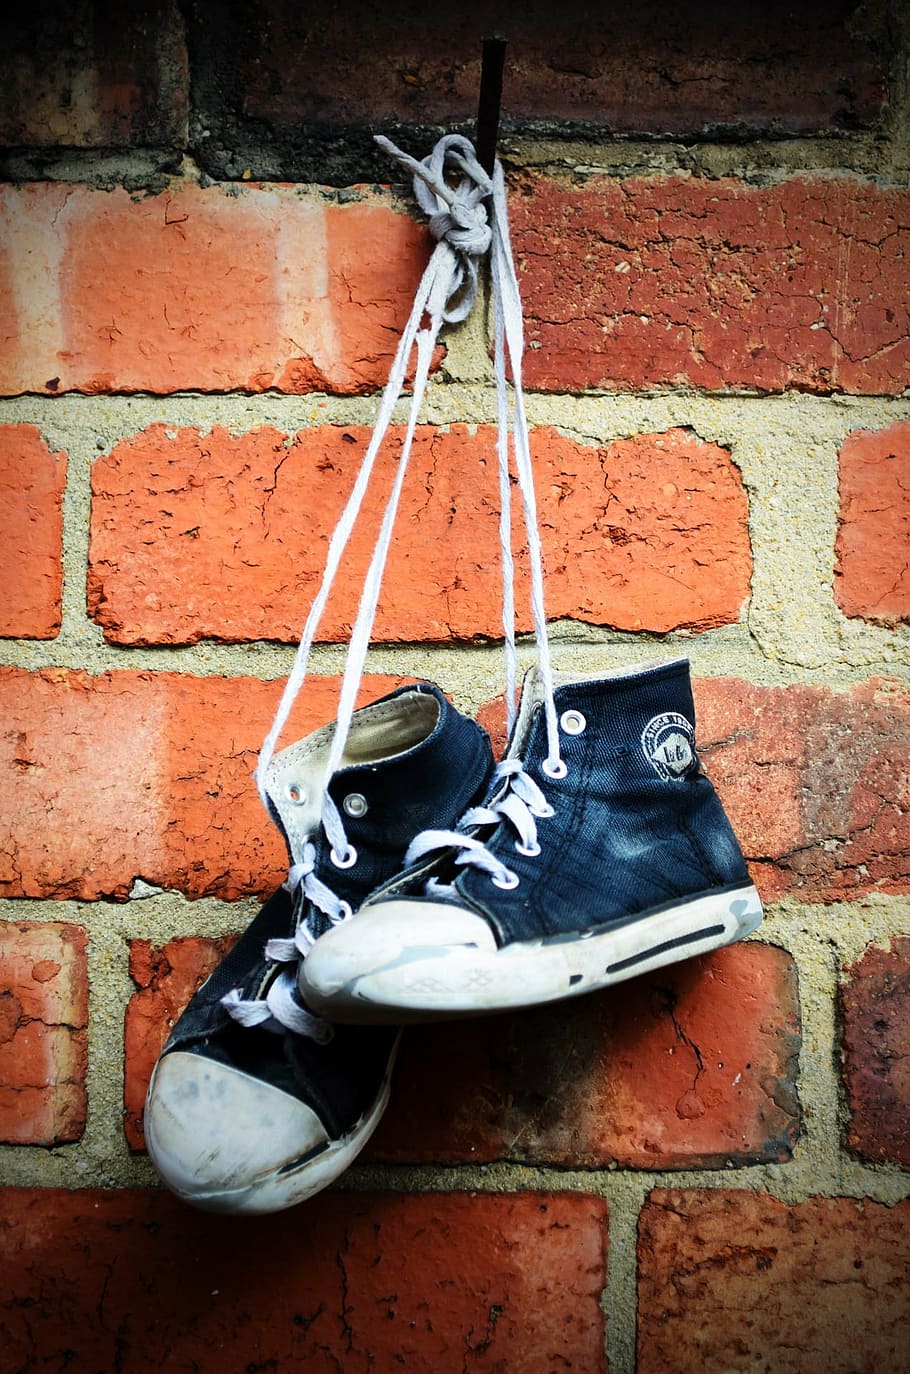 pair, sneakers, hanging, brick wall, shoes, boots, old, children, wall, brick